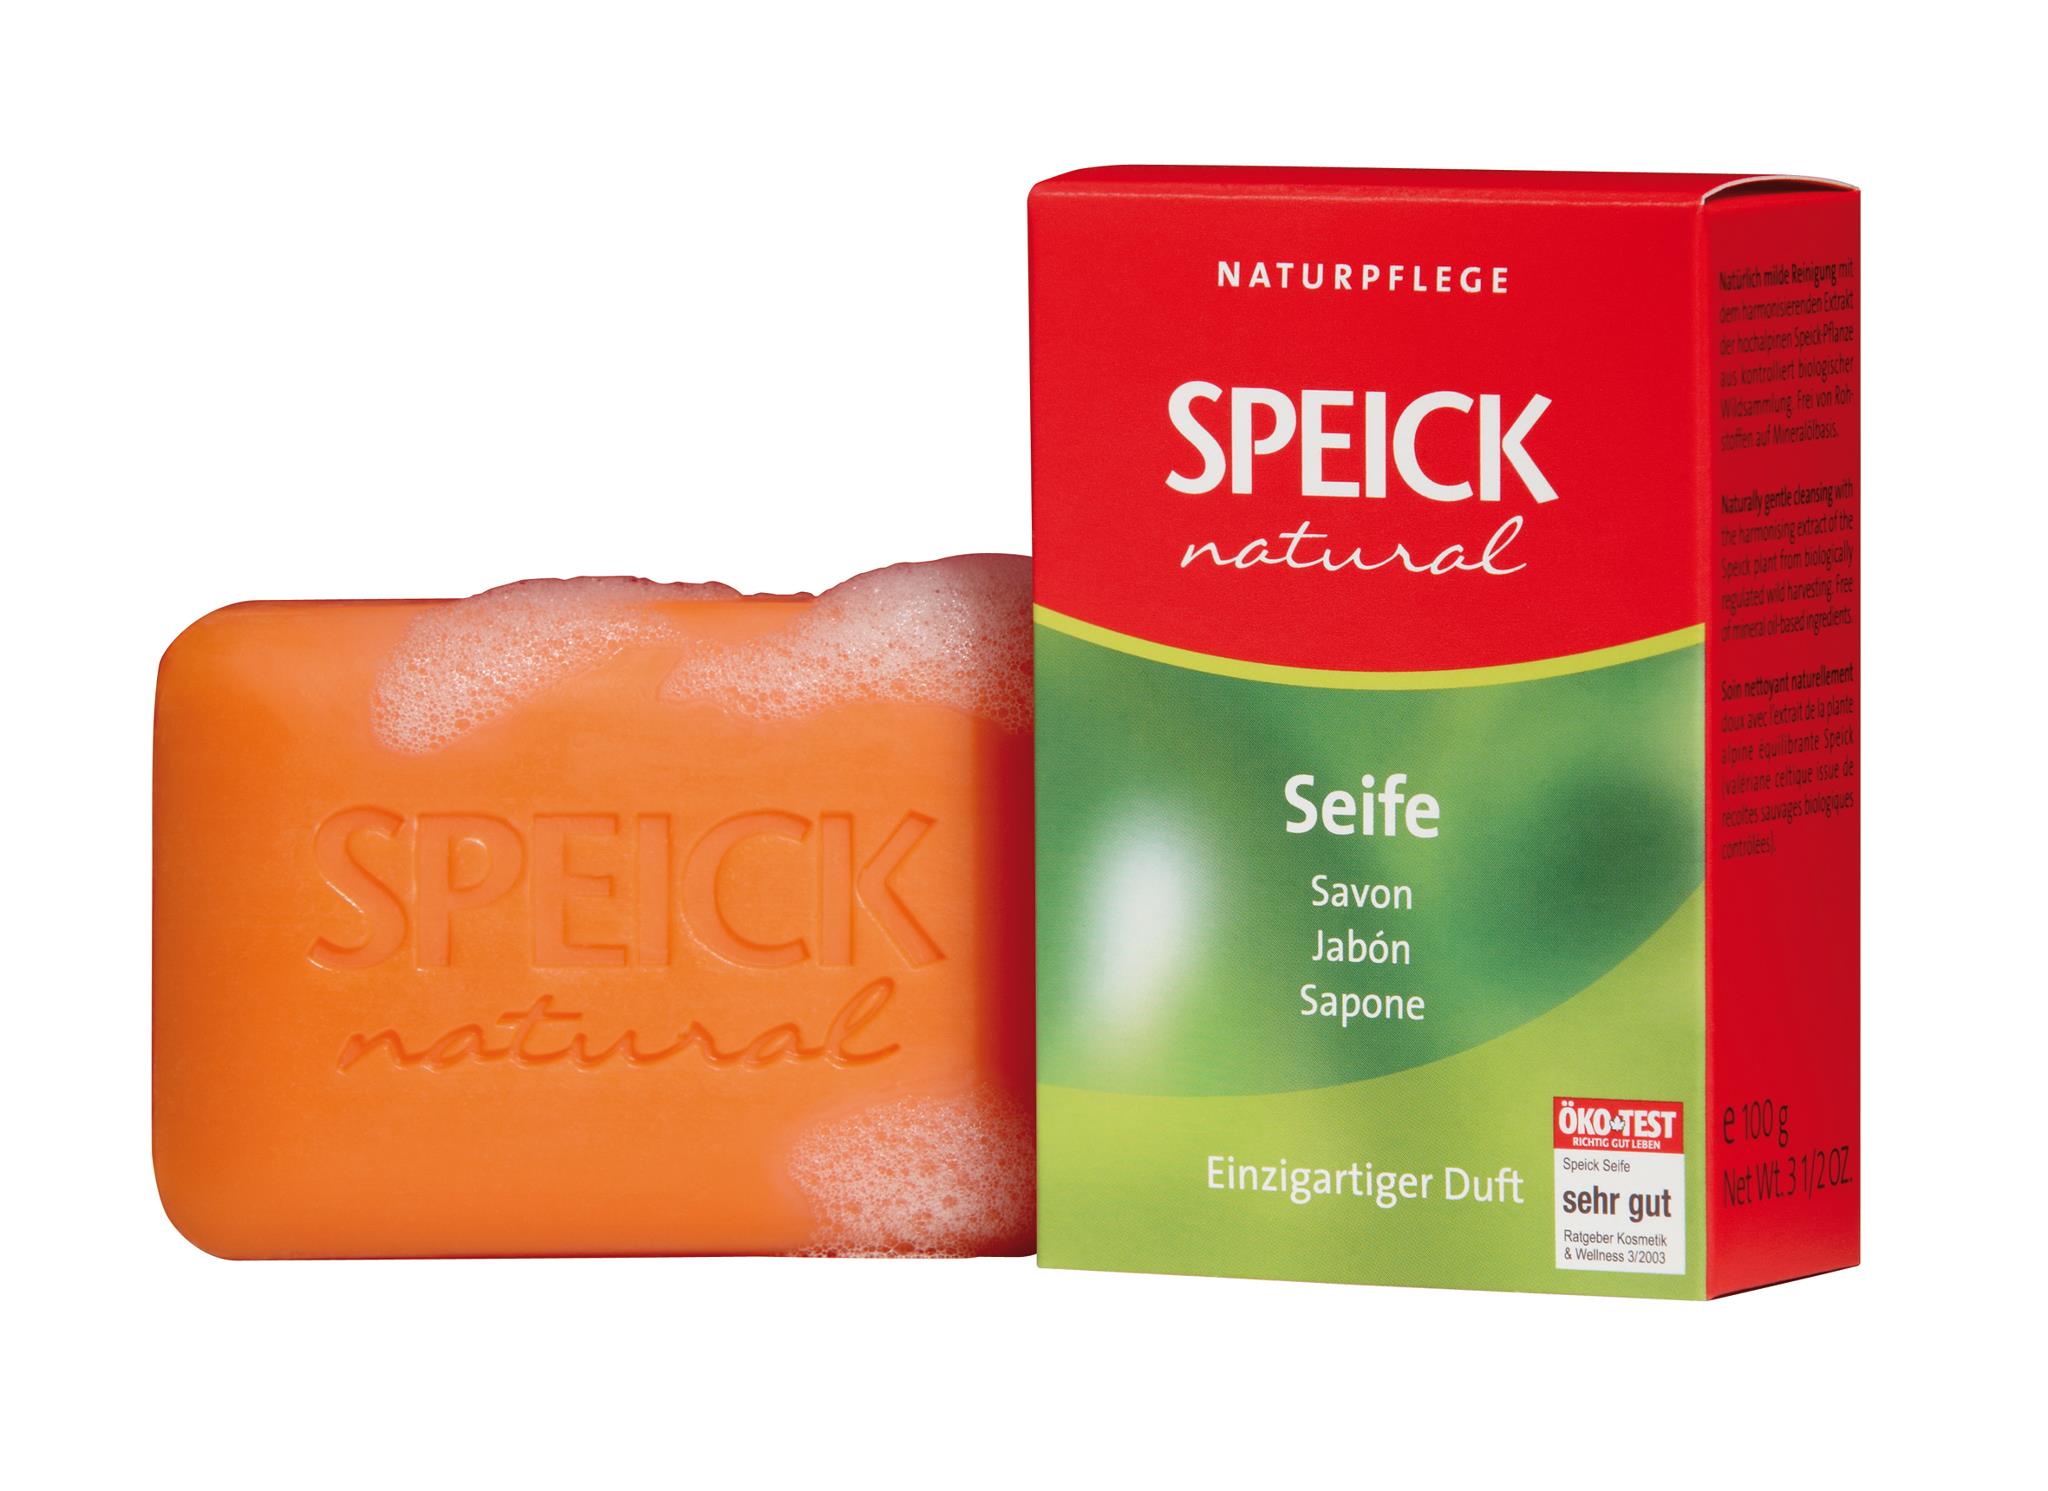 Speick Combines Exclusive Extract With Natural Ingredients in Superior Products